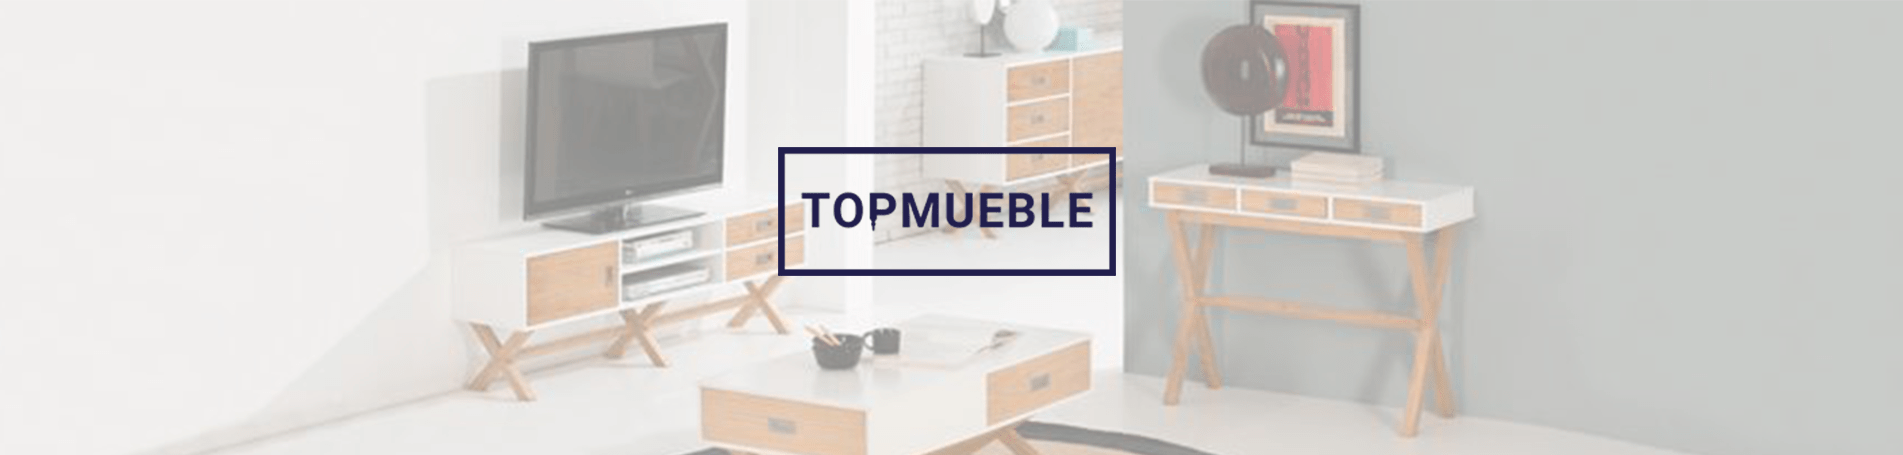 Top Mueble, Lifting Group’s new online SEO & Reputation client